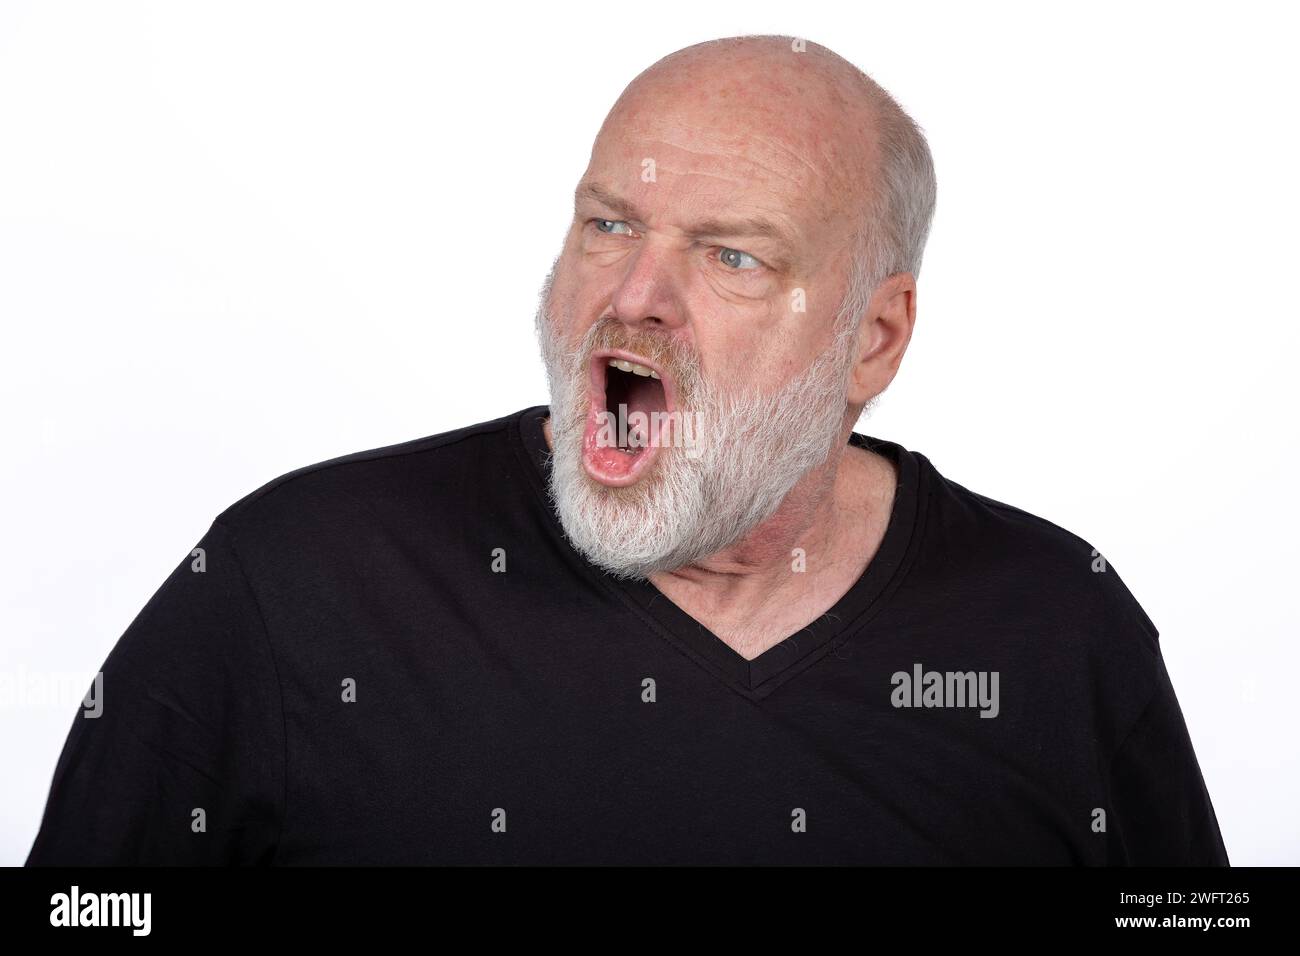 Intense Middle Age Bearded Man Shouting with Anger in Black T-Shirt, Expressive Facial Emotion on White Background - Powerful Emotional Portrait Stock Photo